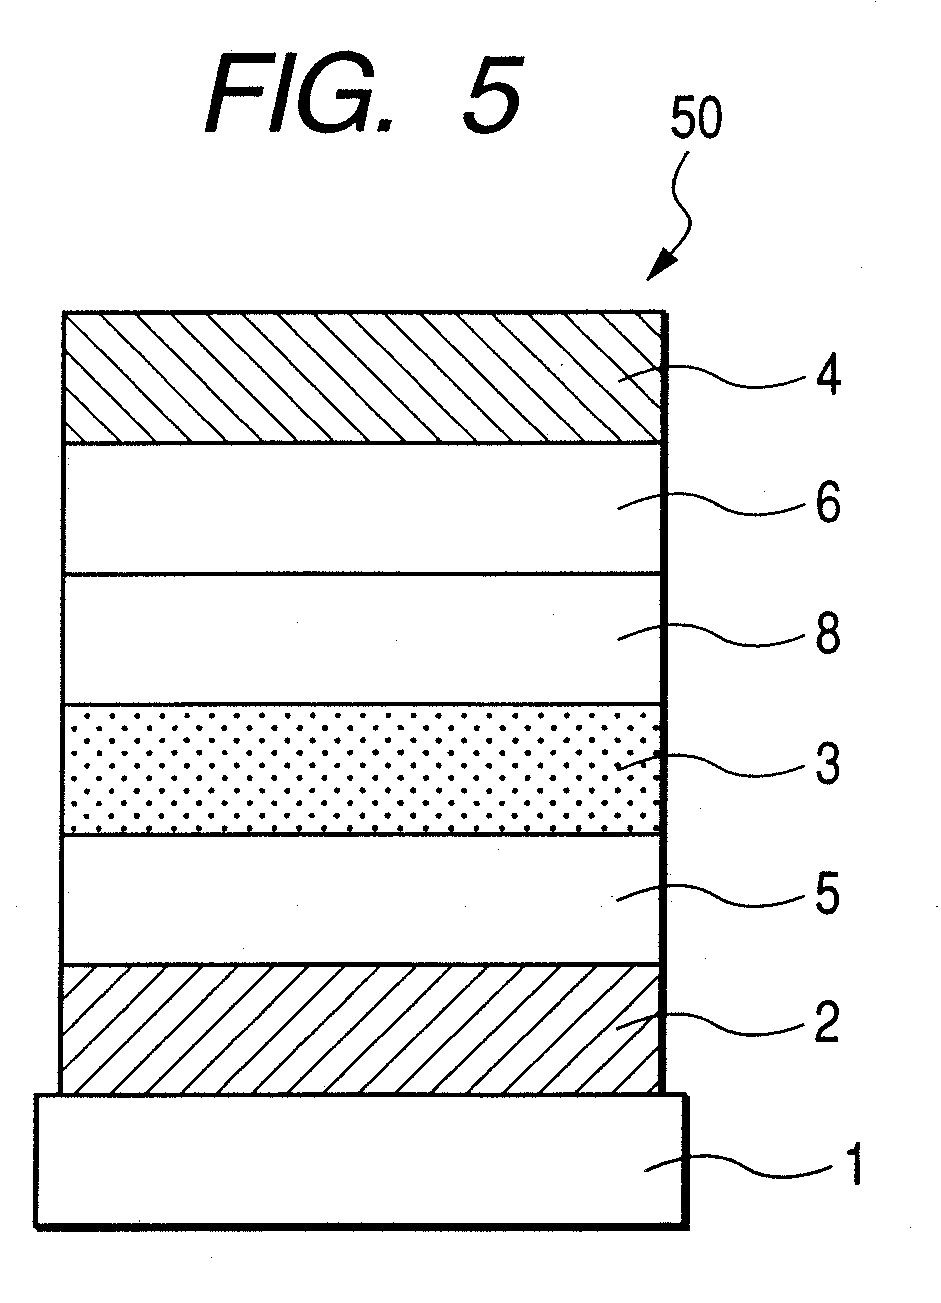 BENZO[a]FLUORANTHENE COMPOUND AND ORGANIC LIGHT EMITTING DEVICE USING THE SAME